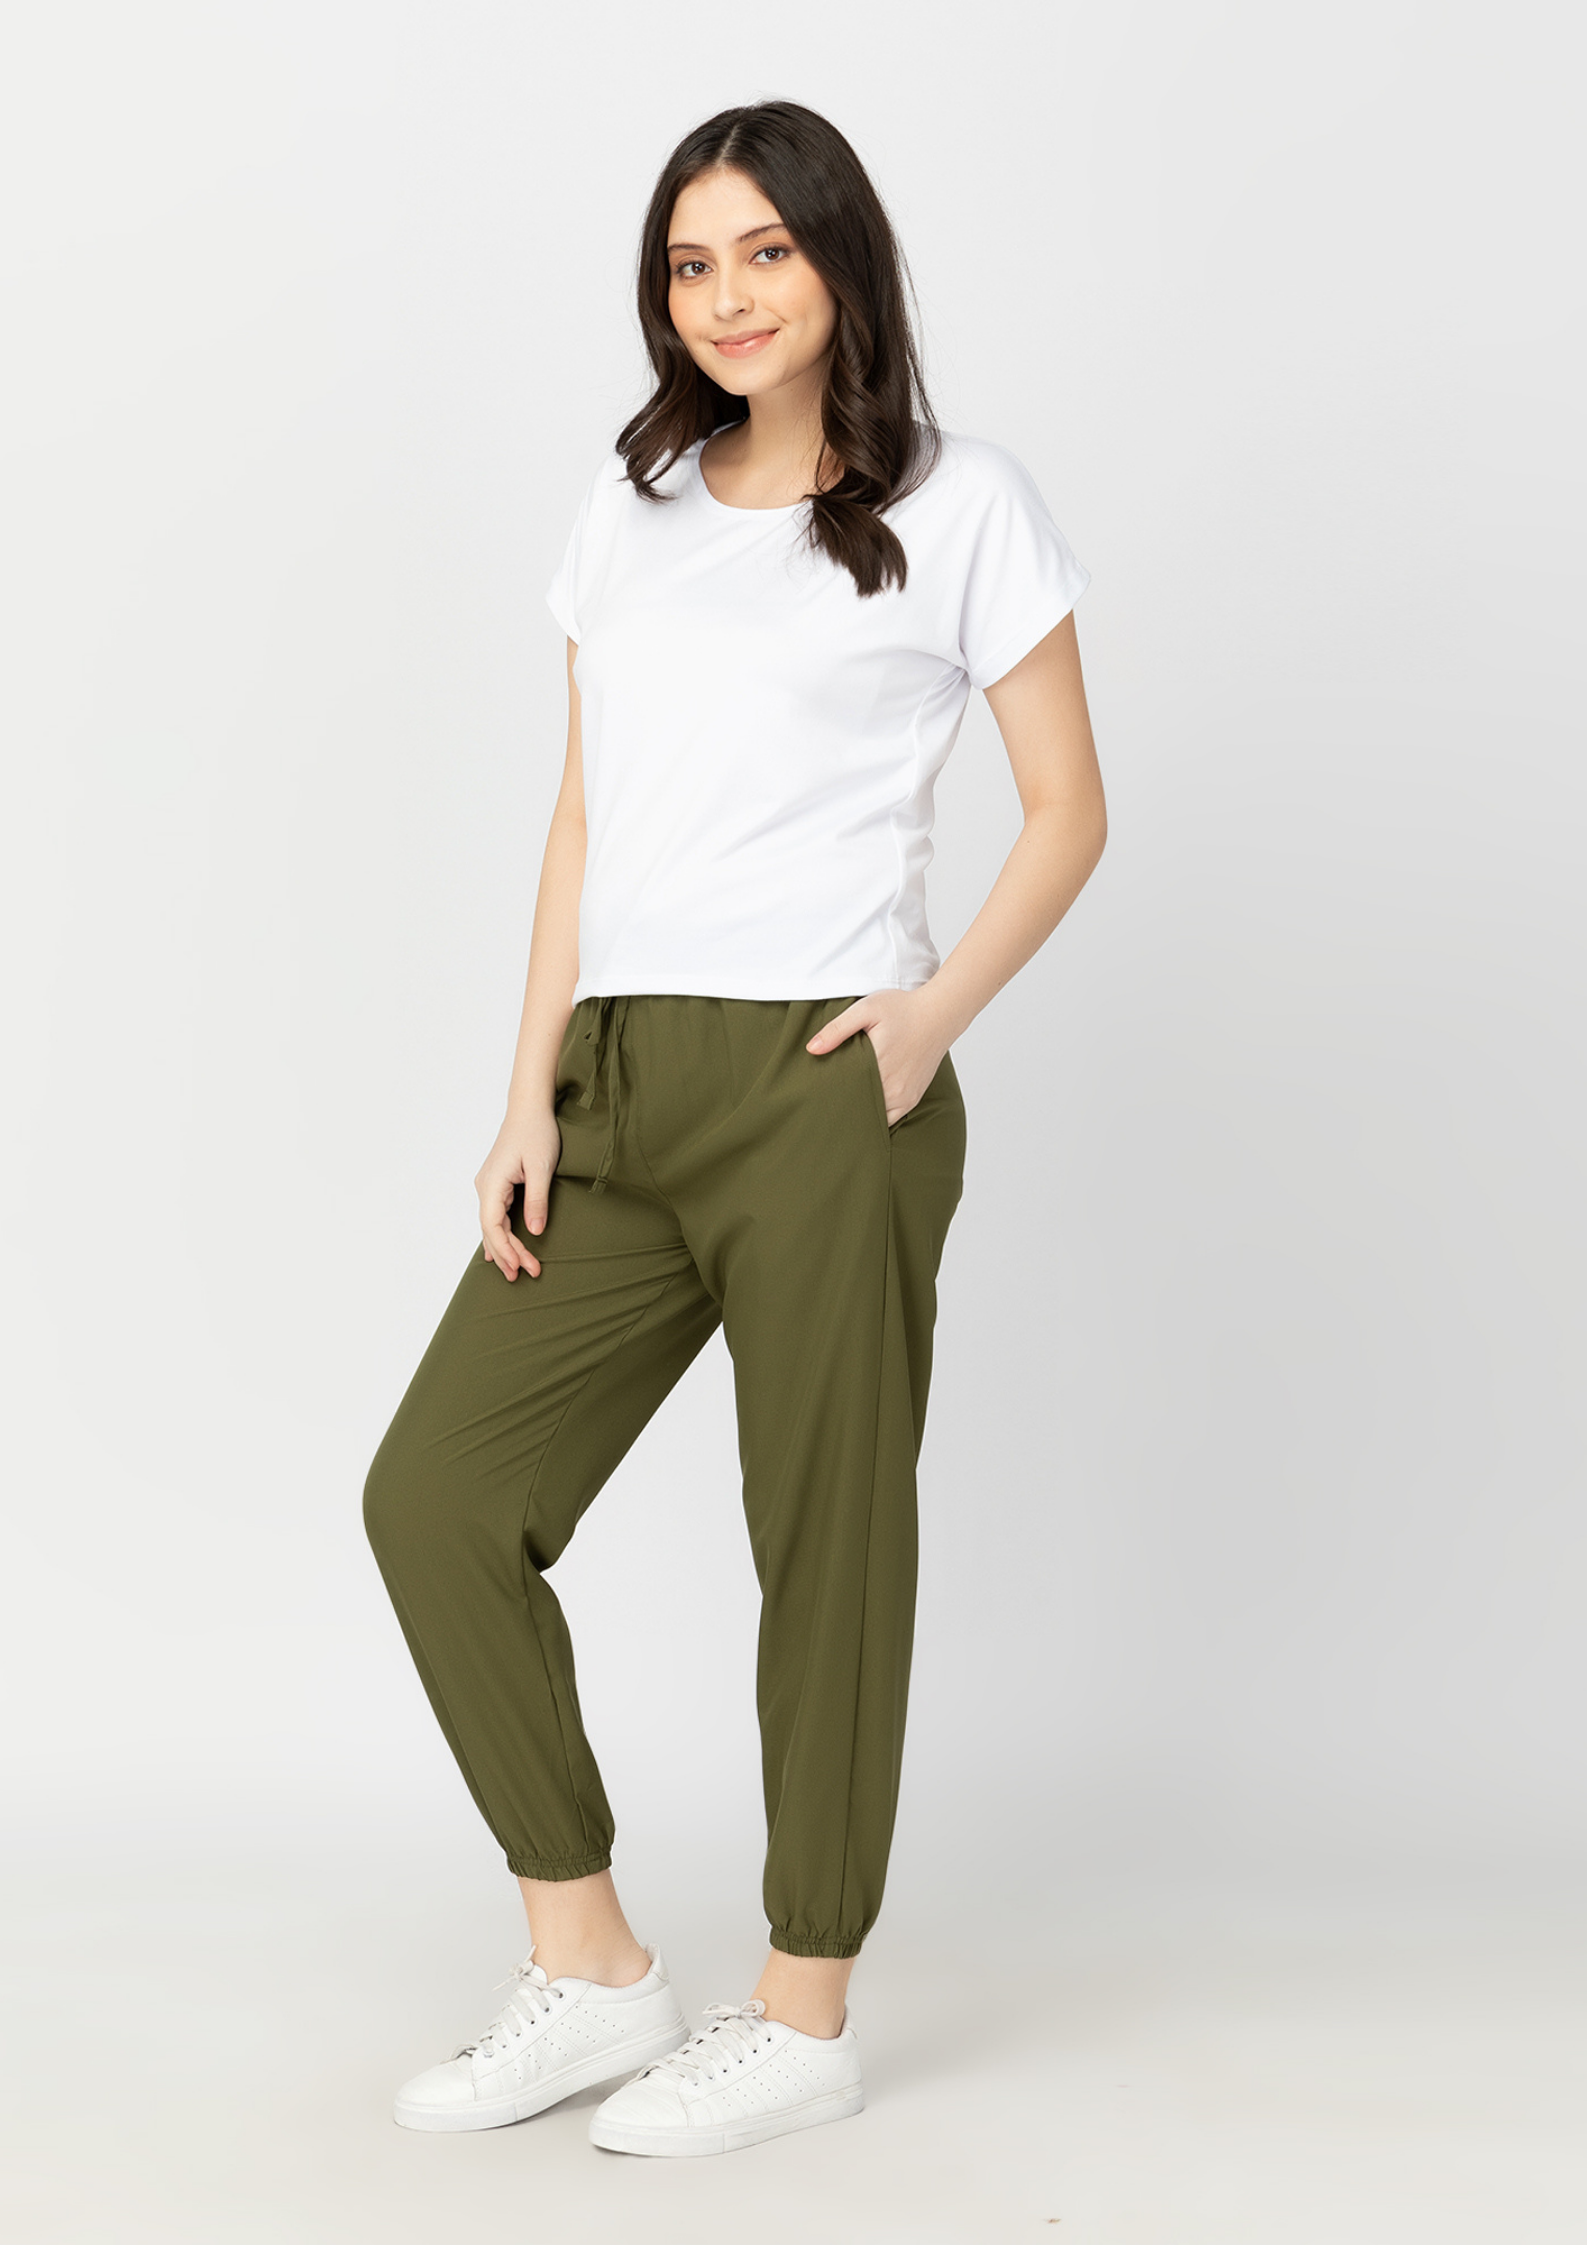 Buy Olive Green Men Striped Sweatpants Online in India at Beyoung